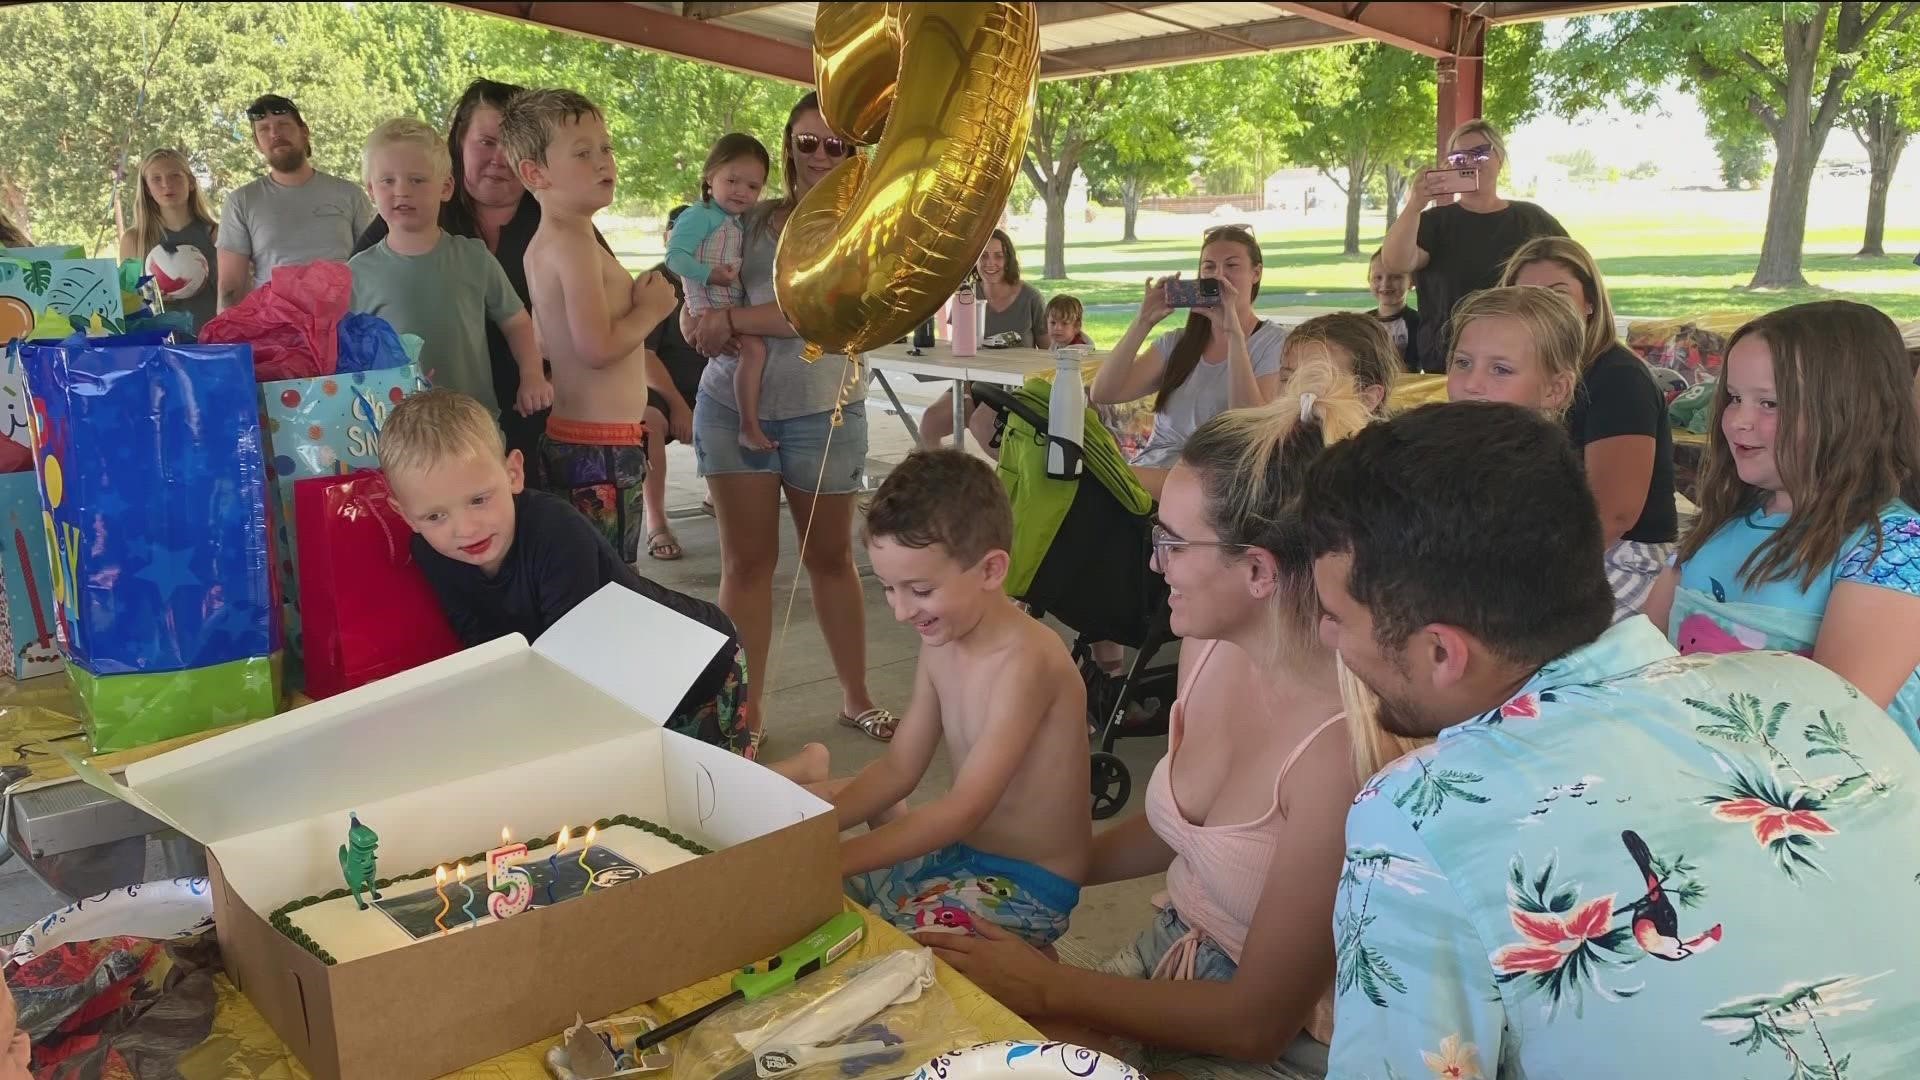 There were just a few RSVPs for Theo Kuhn's party, so his dad posted a birthday invite on Facebook. Dozens of strangers showed up to celebrate the little boy.